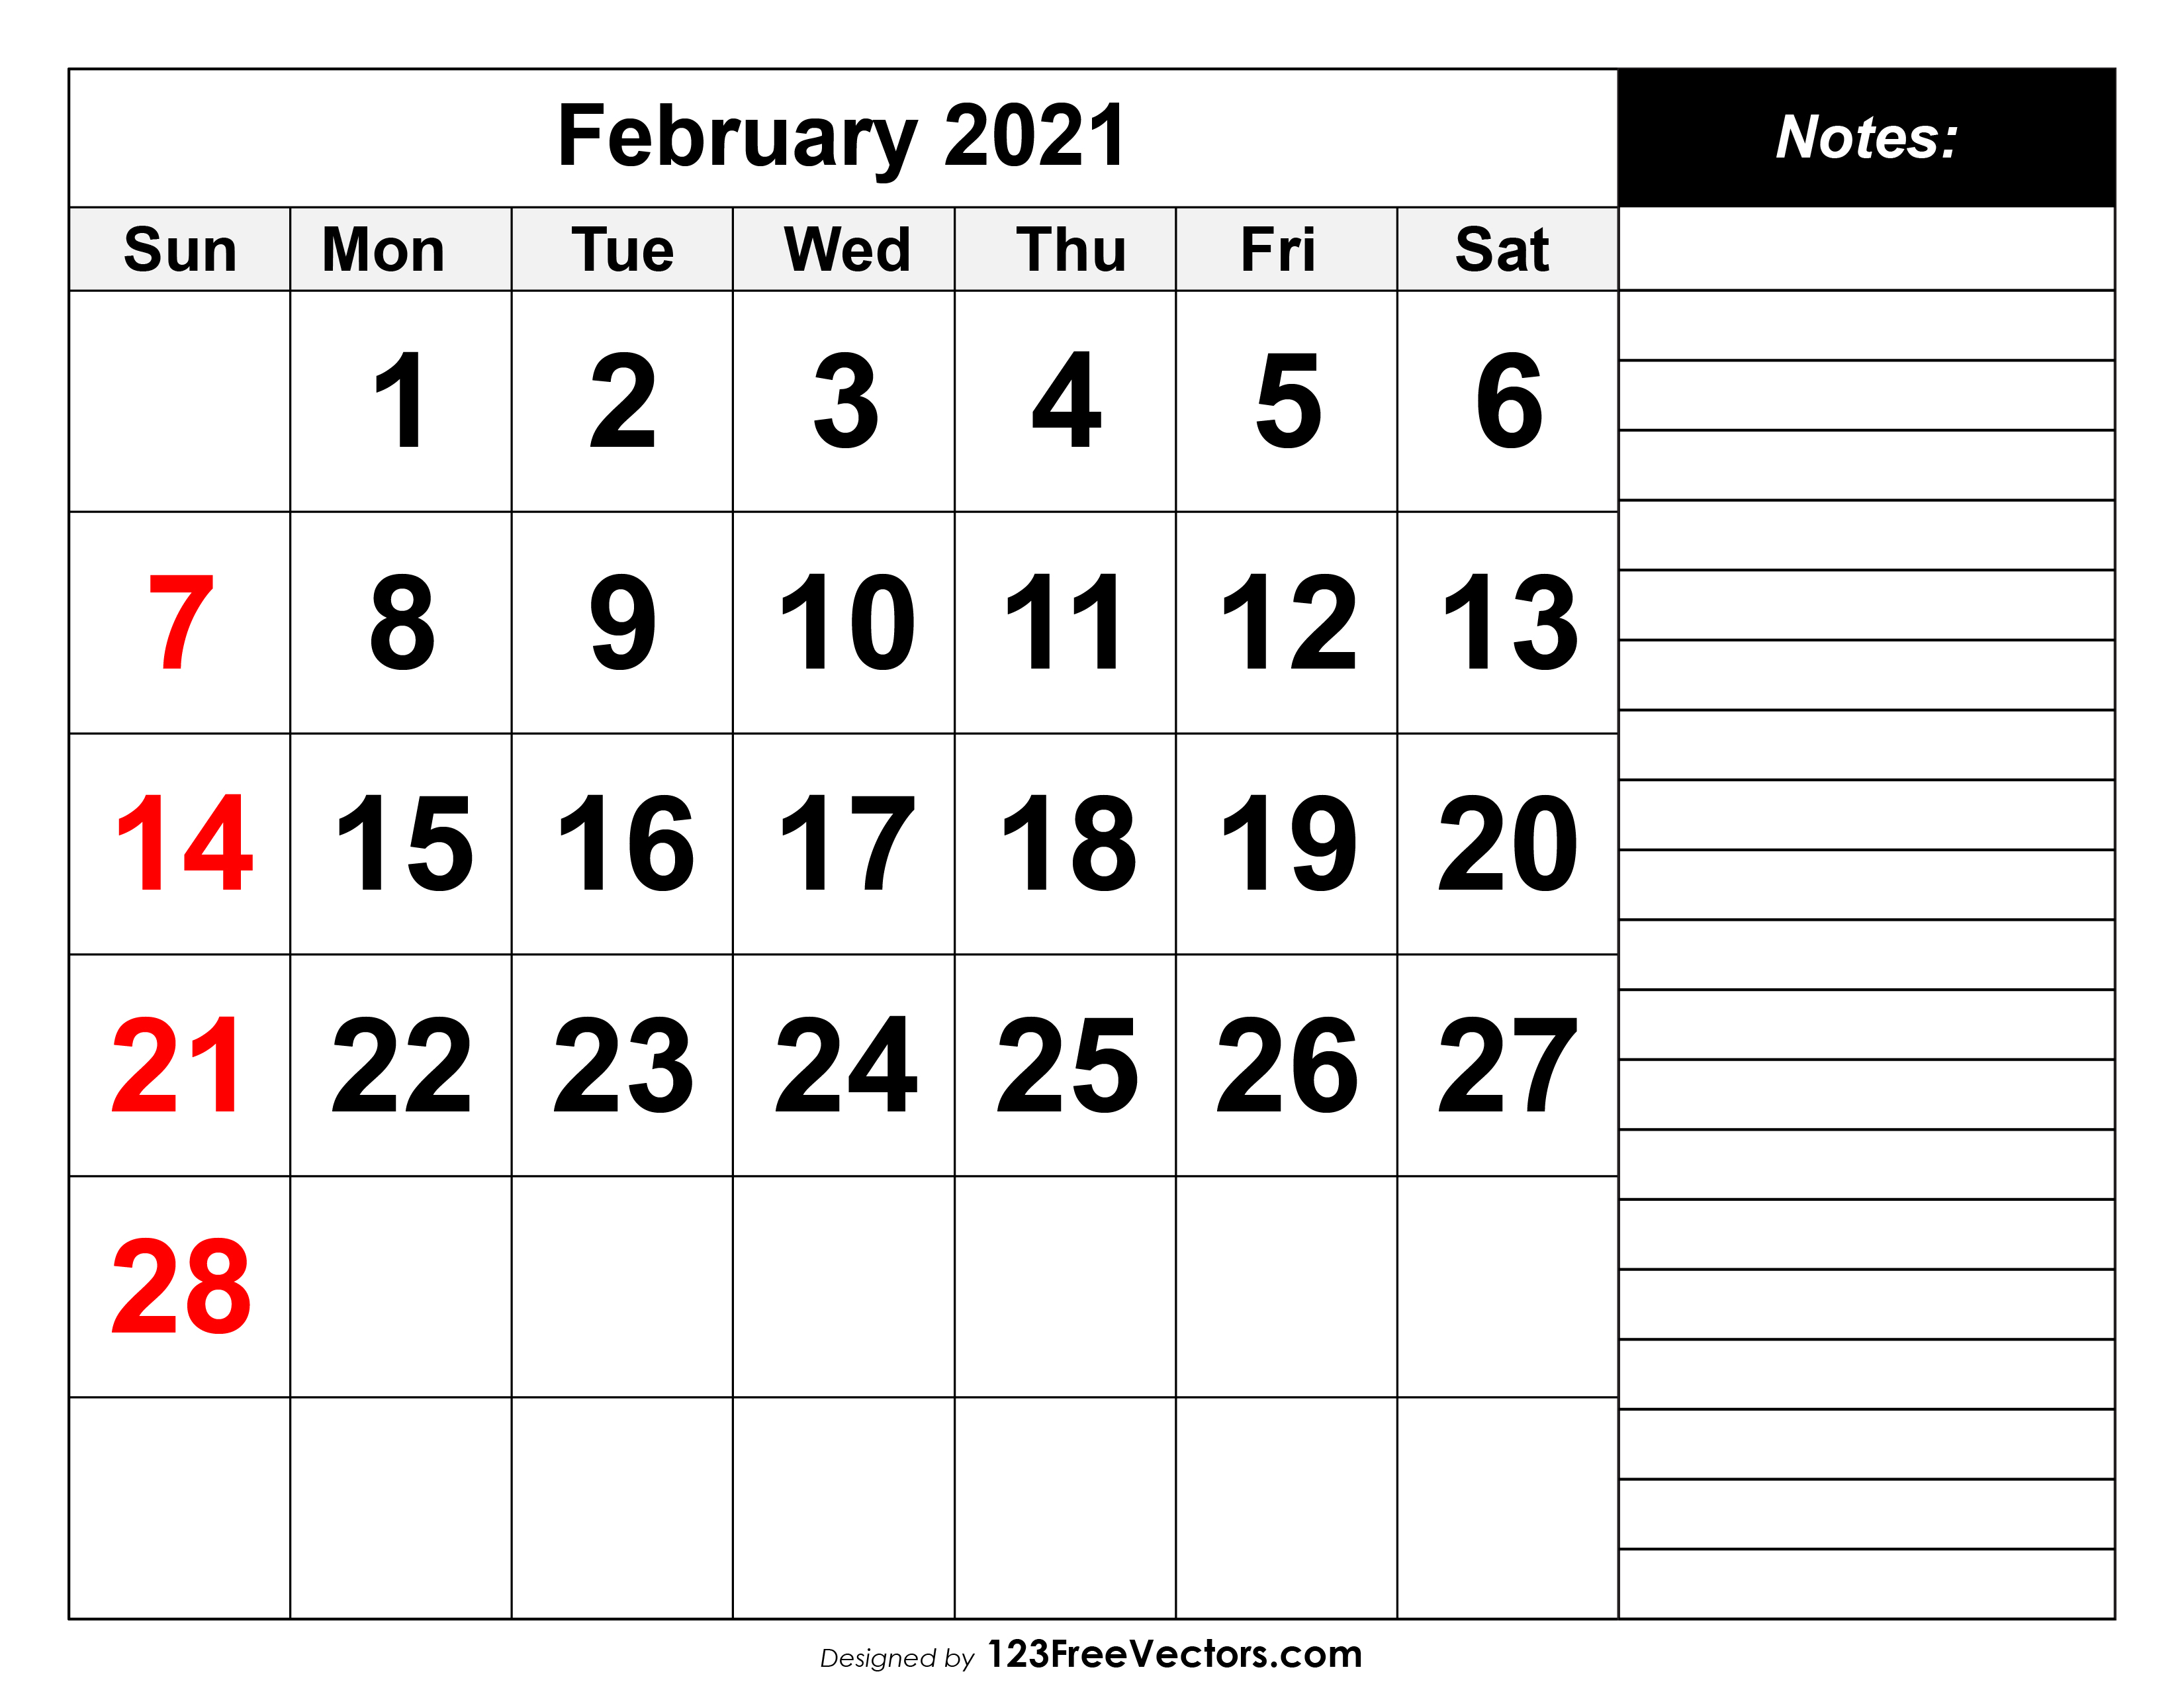 Featured image of post Blank Calendar Feb 2021 - Save this calendar to your computer for easy access.